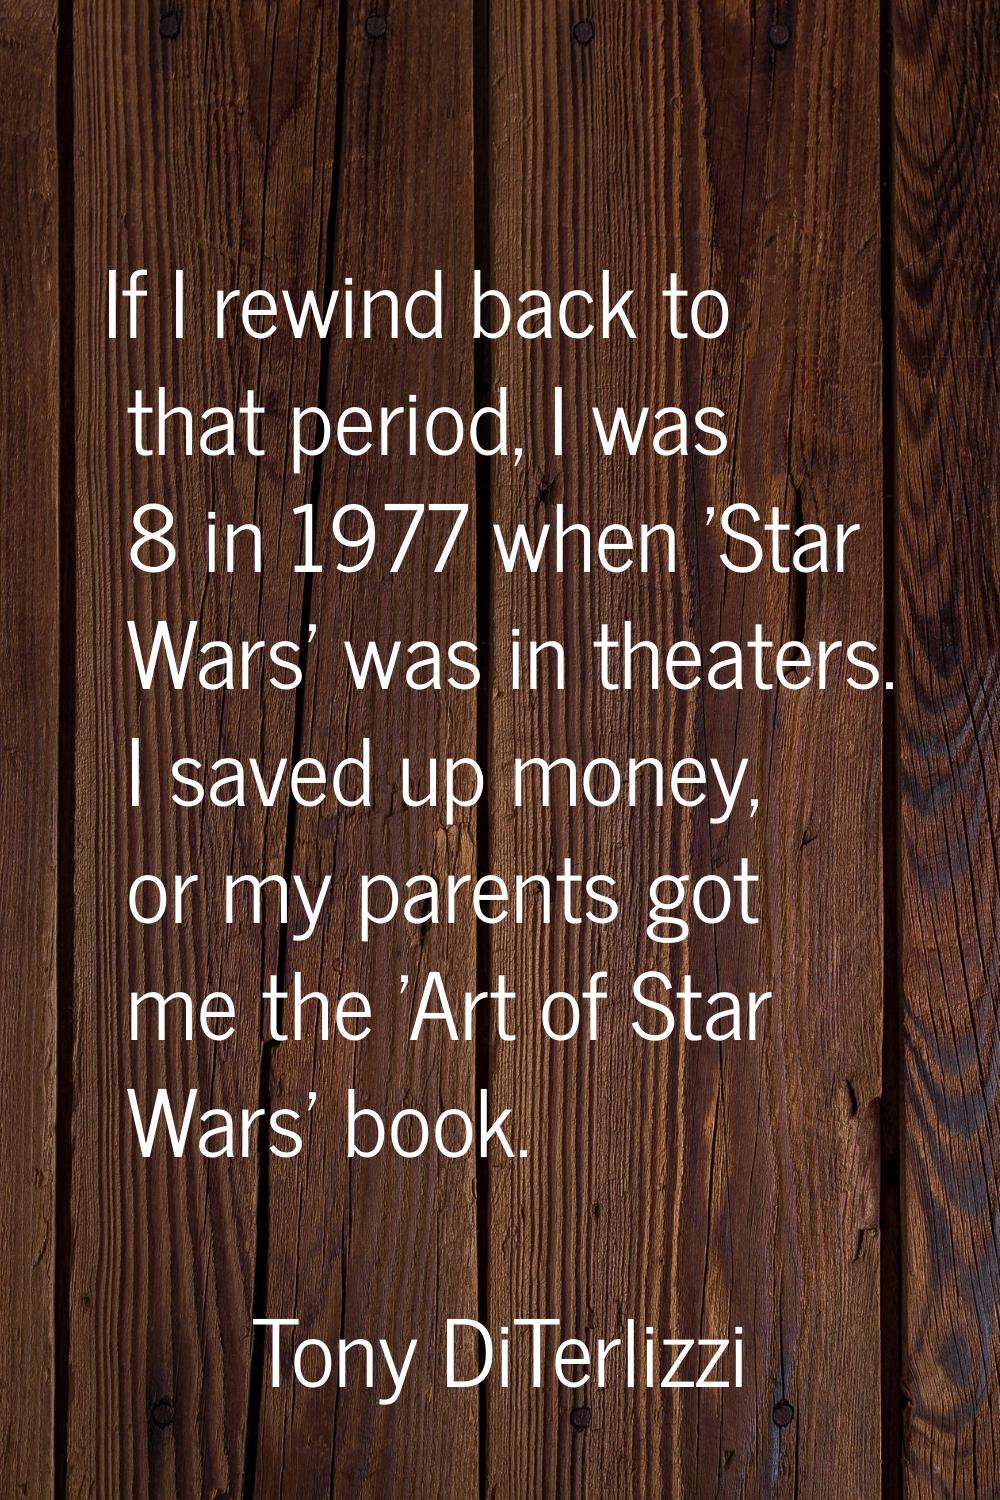 If I rewind back to that period, I was 8 in 1977 when 'Star Wars' was in theaters. I saved up money